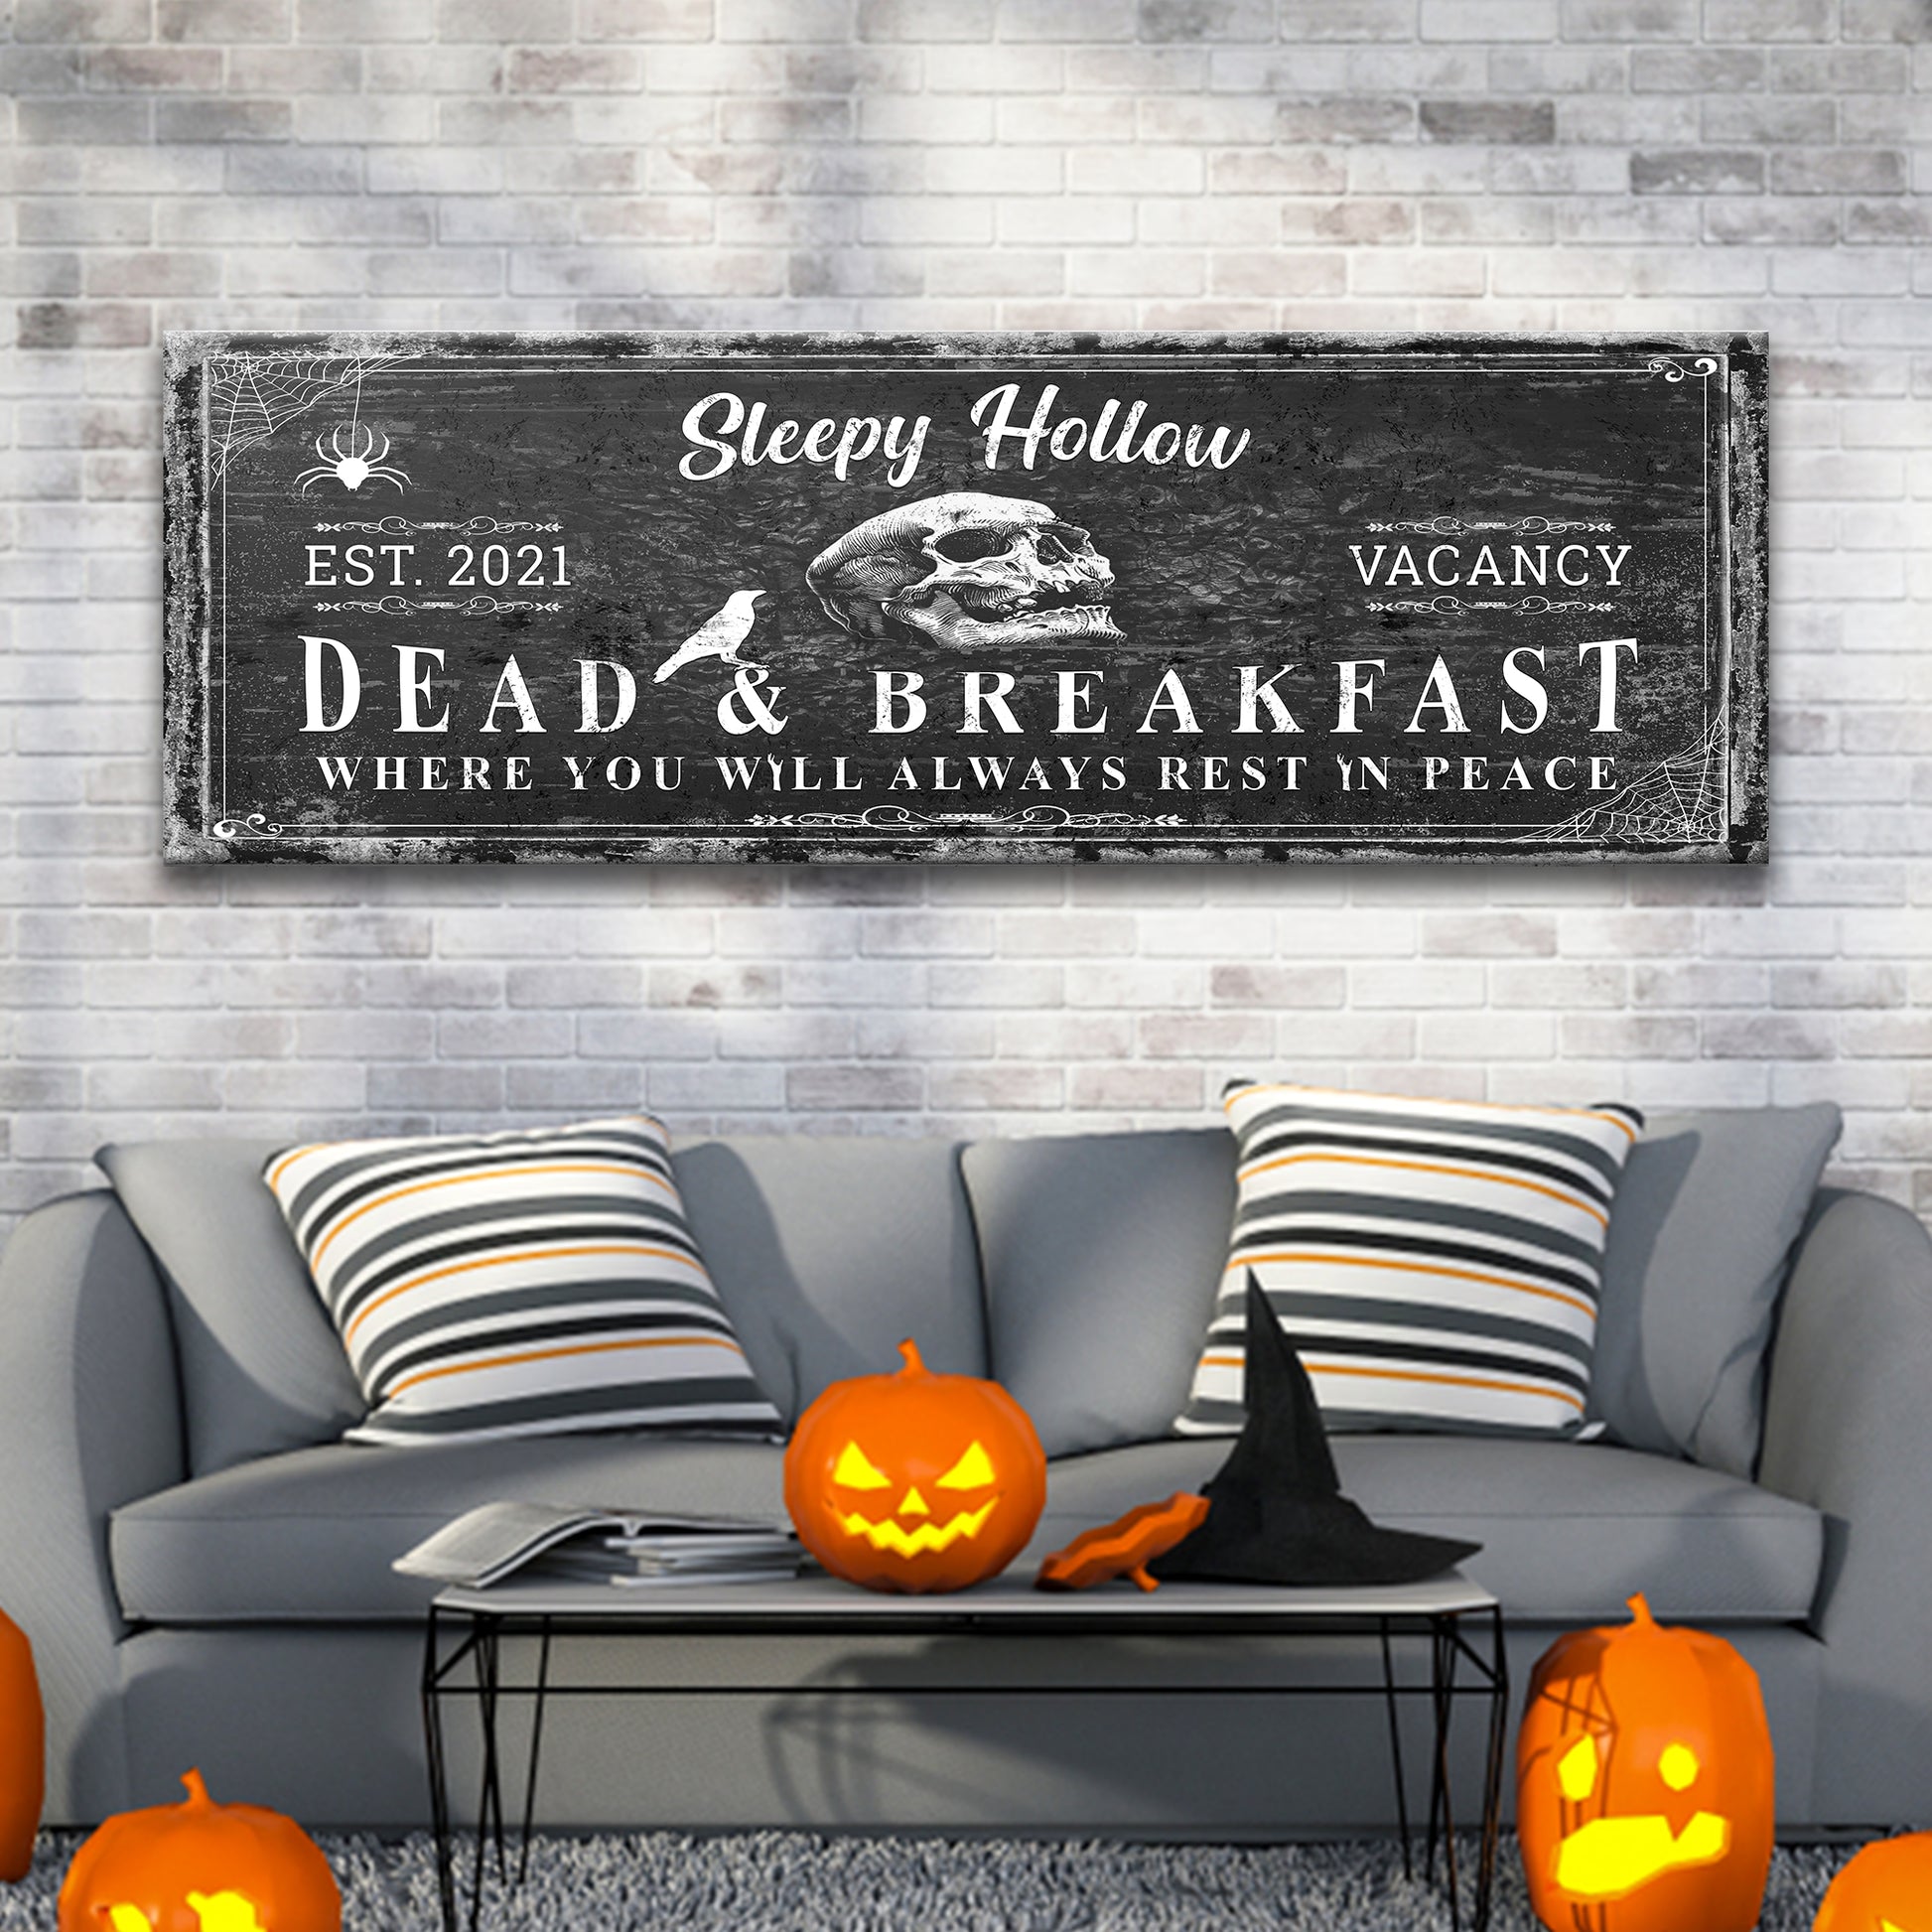 Sleepy Hollow Sign - Image by Tailored Canvases